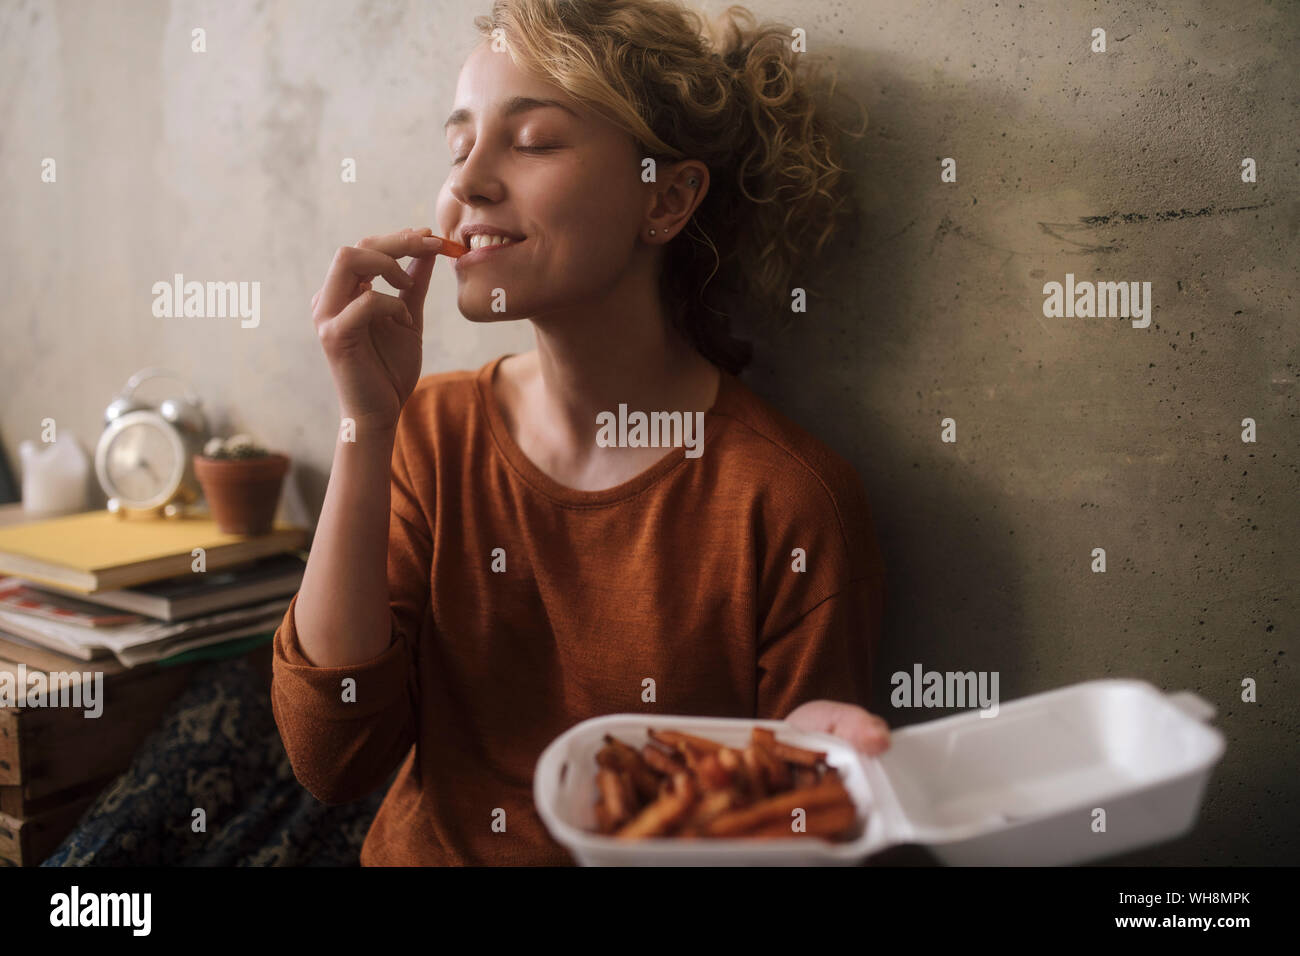 Portrait of young woman eating French Fries at home Stock Photo